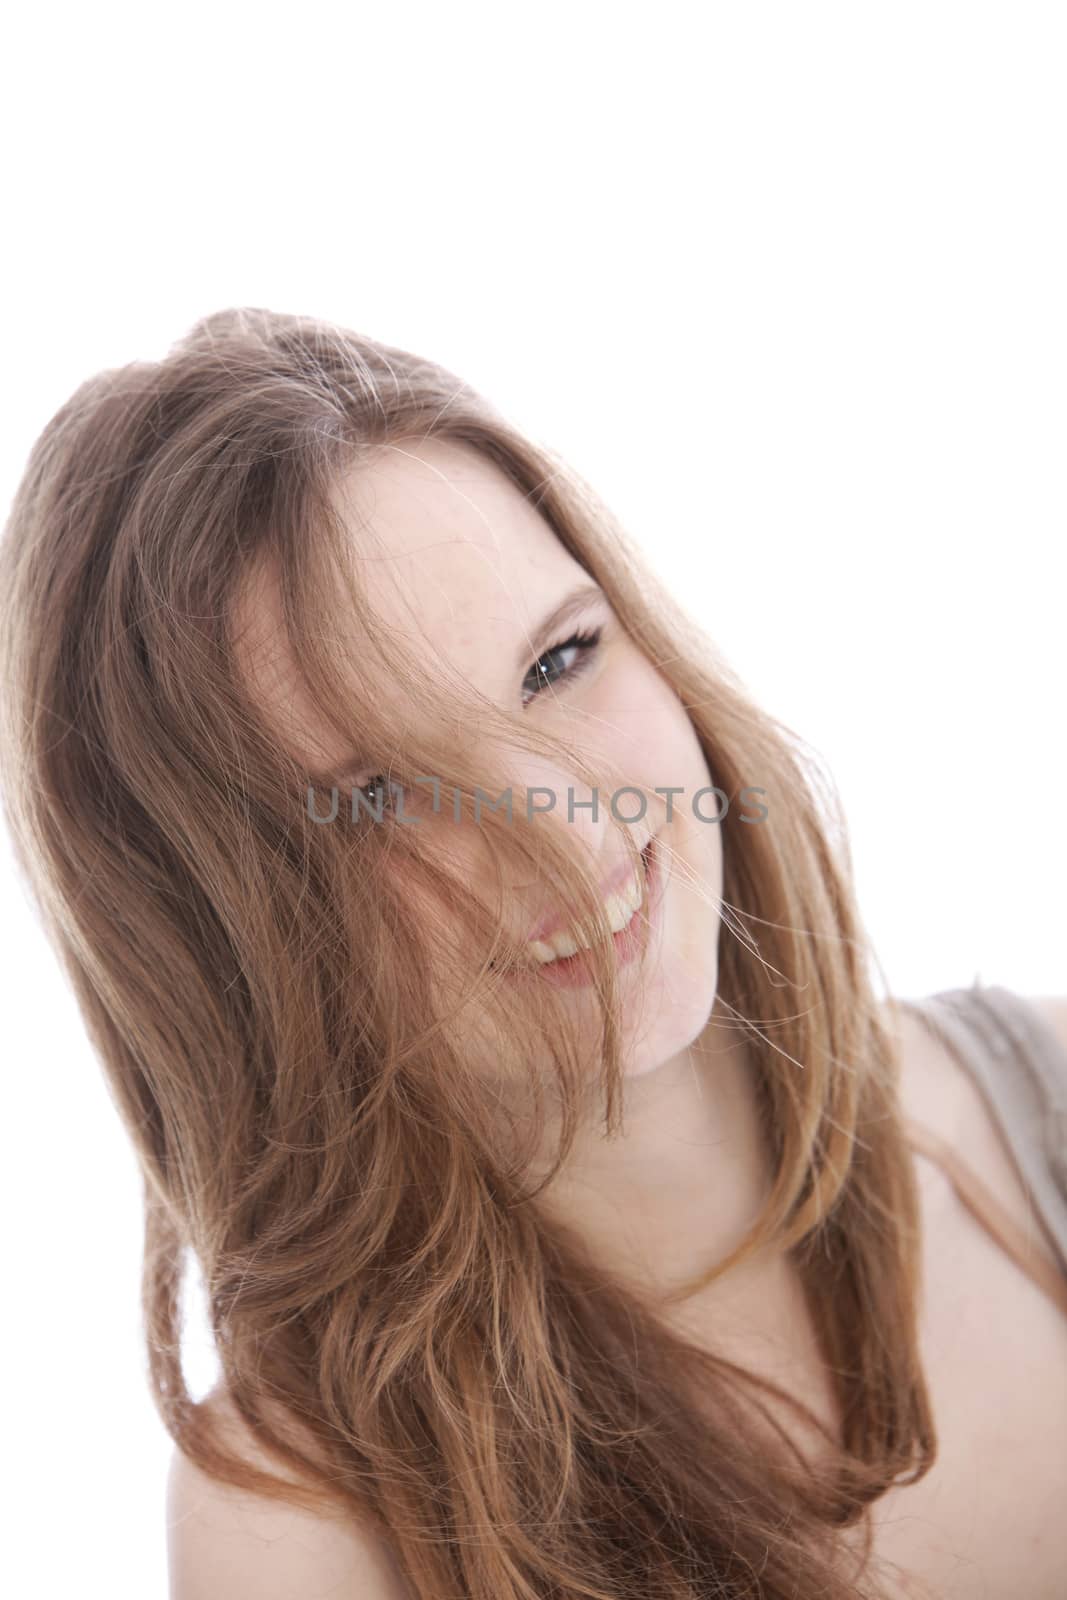 Cute teenage girl smiling at the camera through her hair which is falling over her face, isolated on white